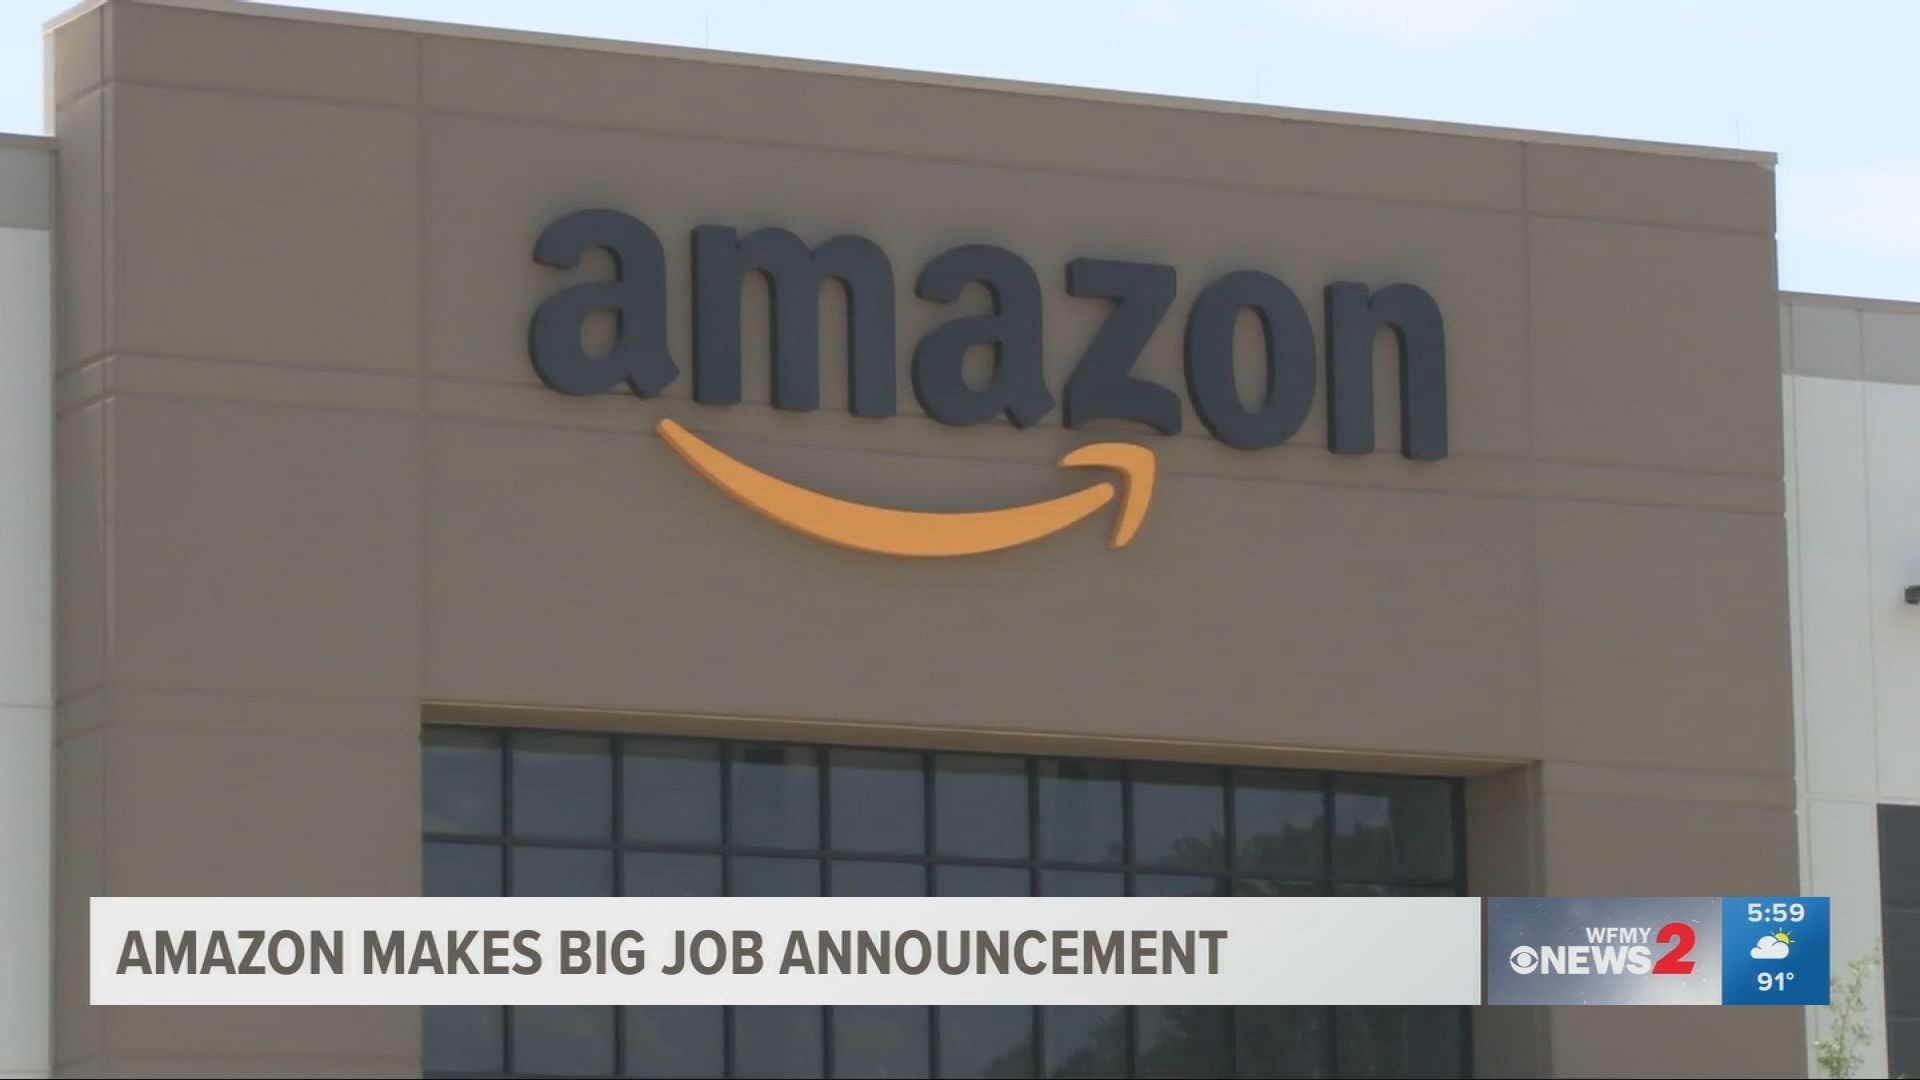 The company is offering jobs starting $15 an hour at the Kernersville fulfillment center.